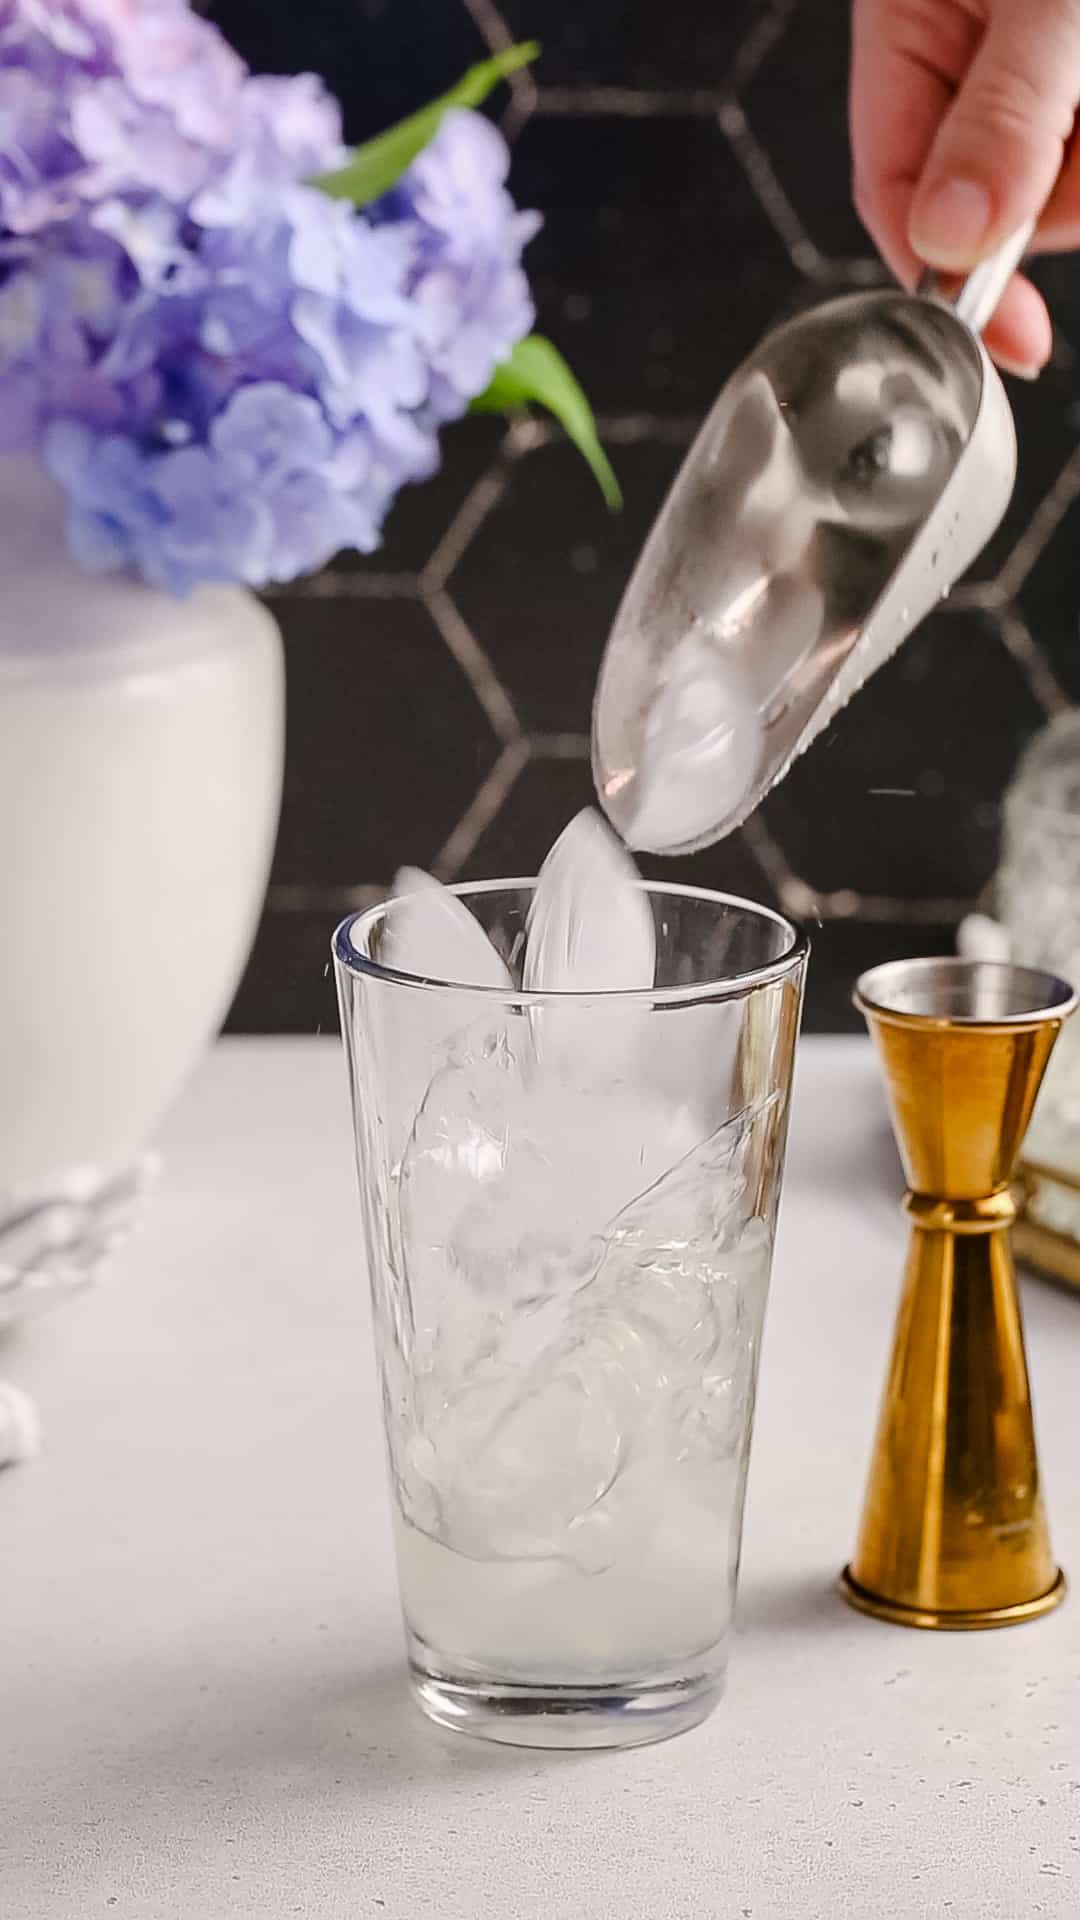 Ice being added to the cocktail shaker glass.